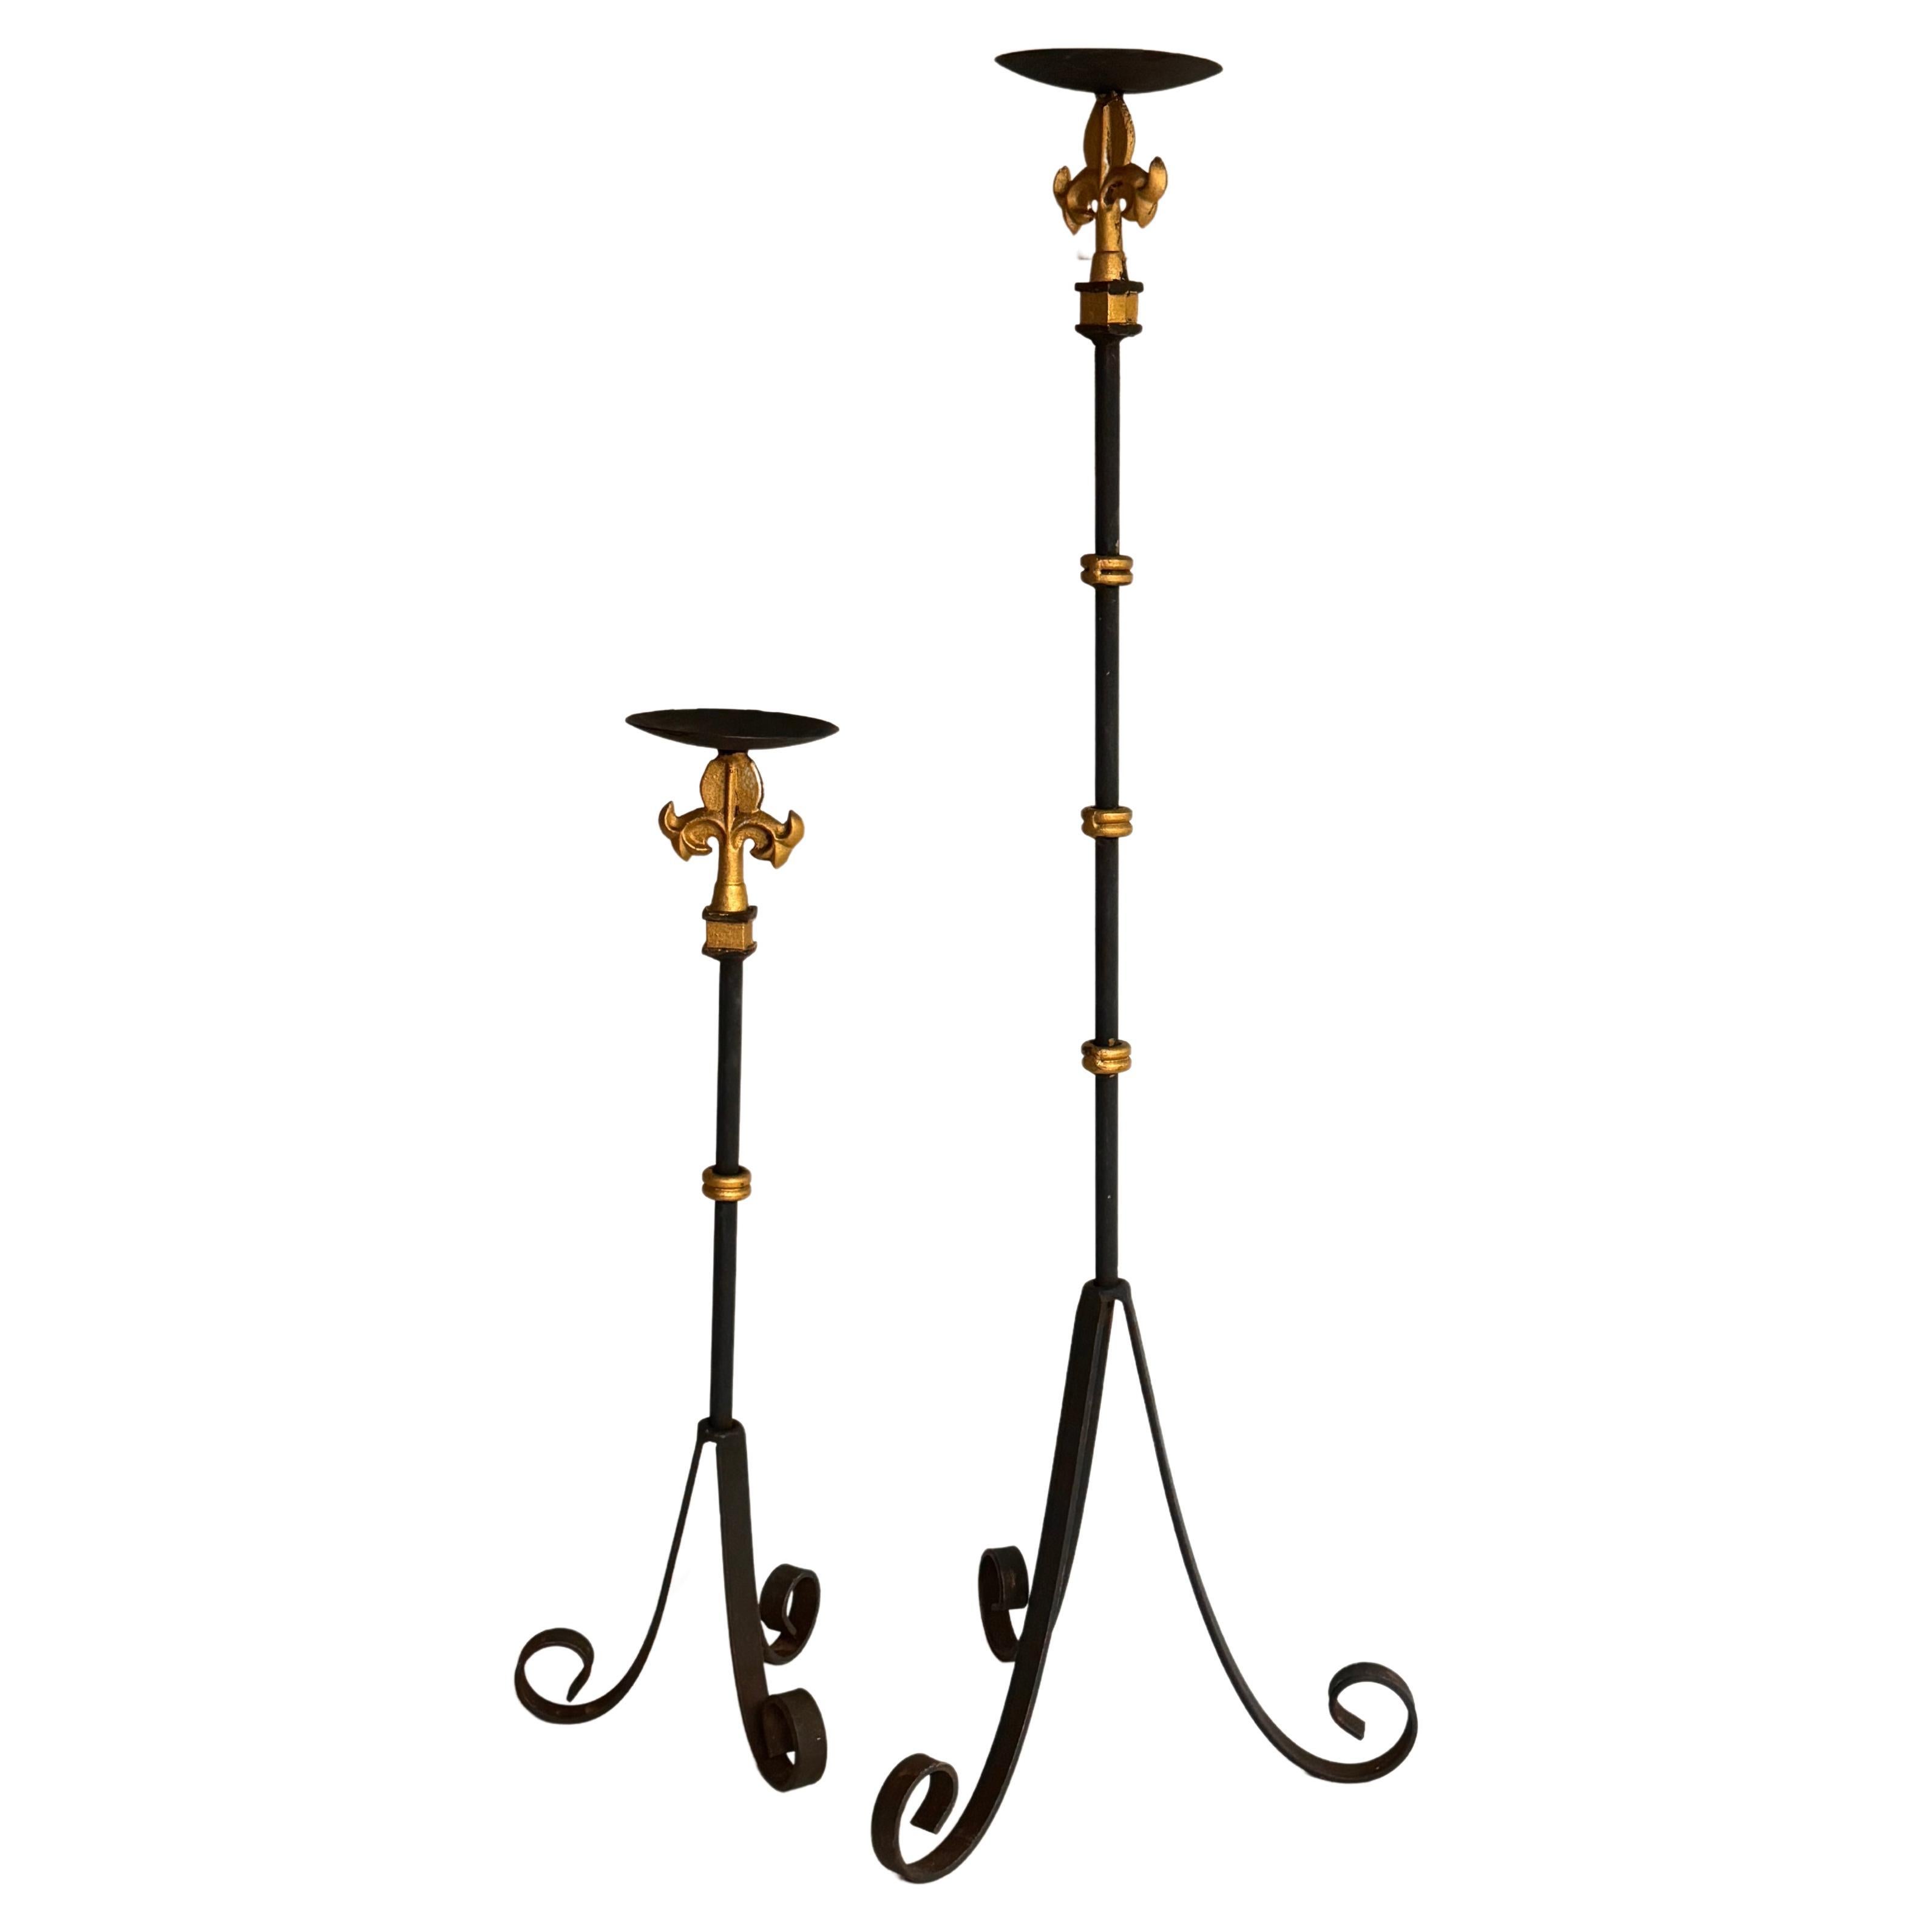 Baroque Revival Gillt Iron Candle Holders or Candlesticks Black and Gold  France 1970 Set of 2 For Sale